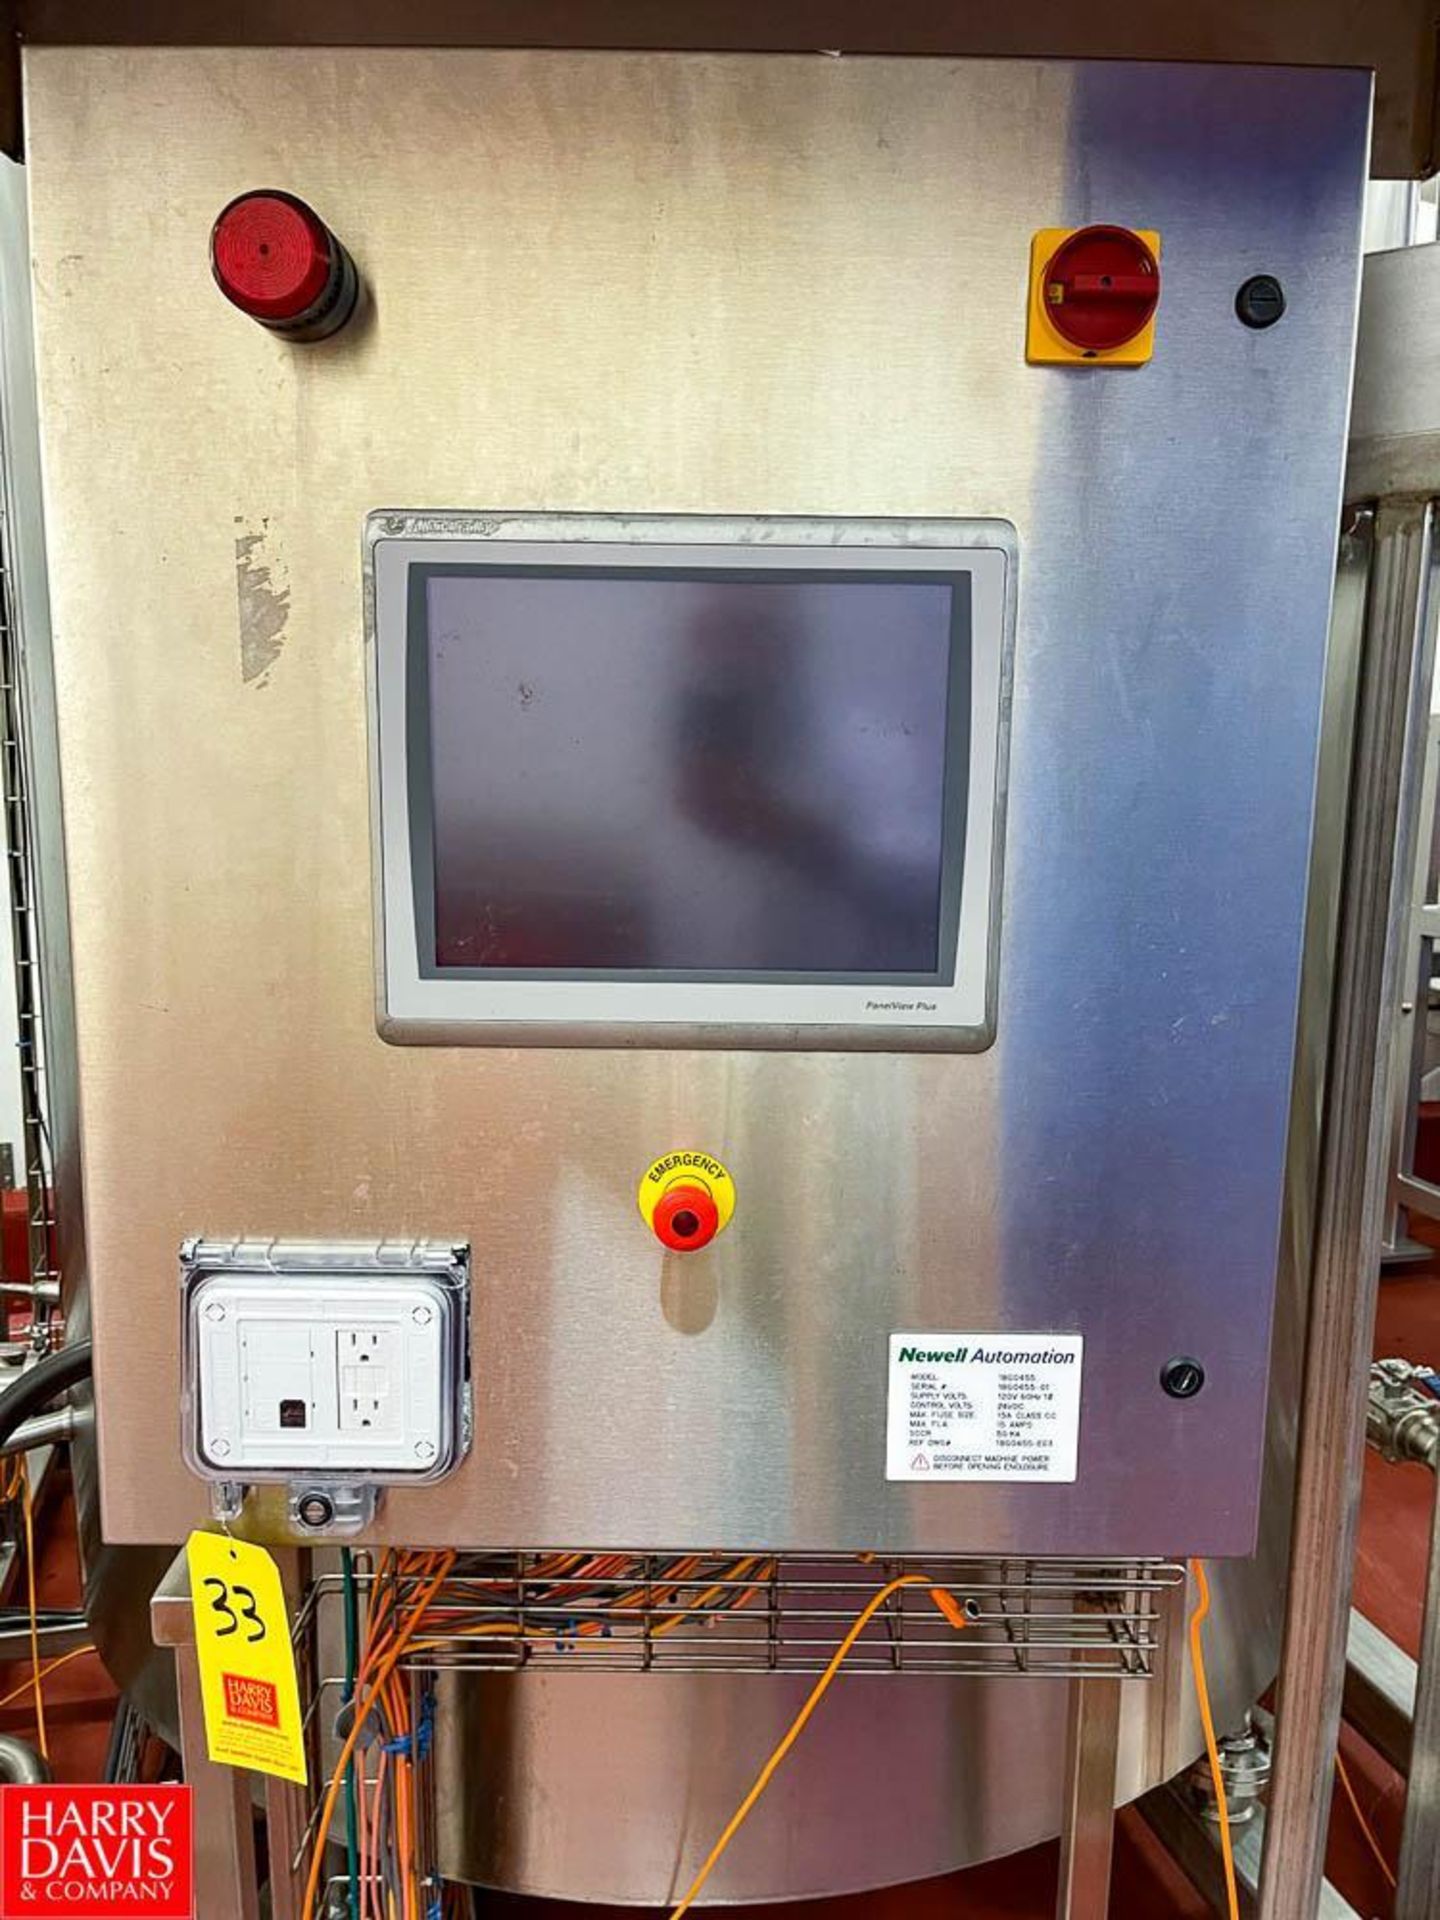 Newell Automation Control Panel, Model: 18G0455, S/N: 18G0455-01, with Allen Bradley Compact Logix 5 - Image 2 of 3